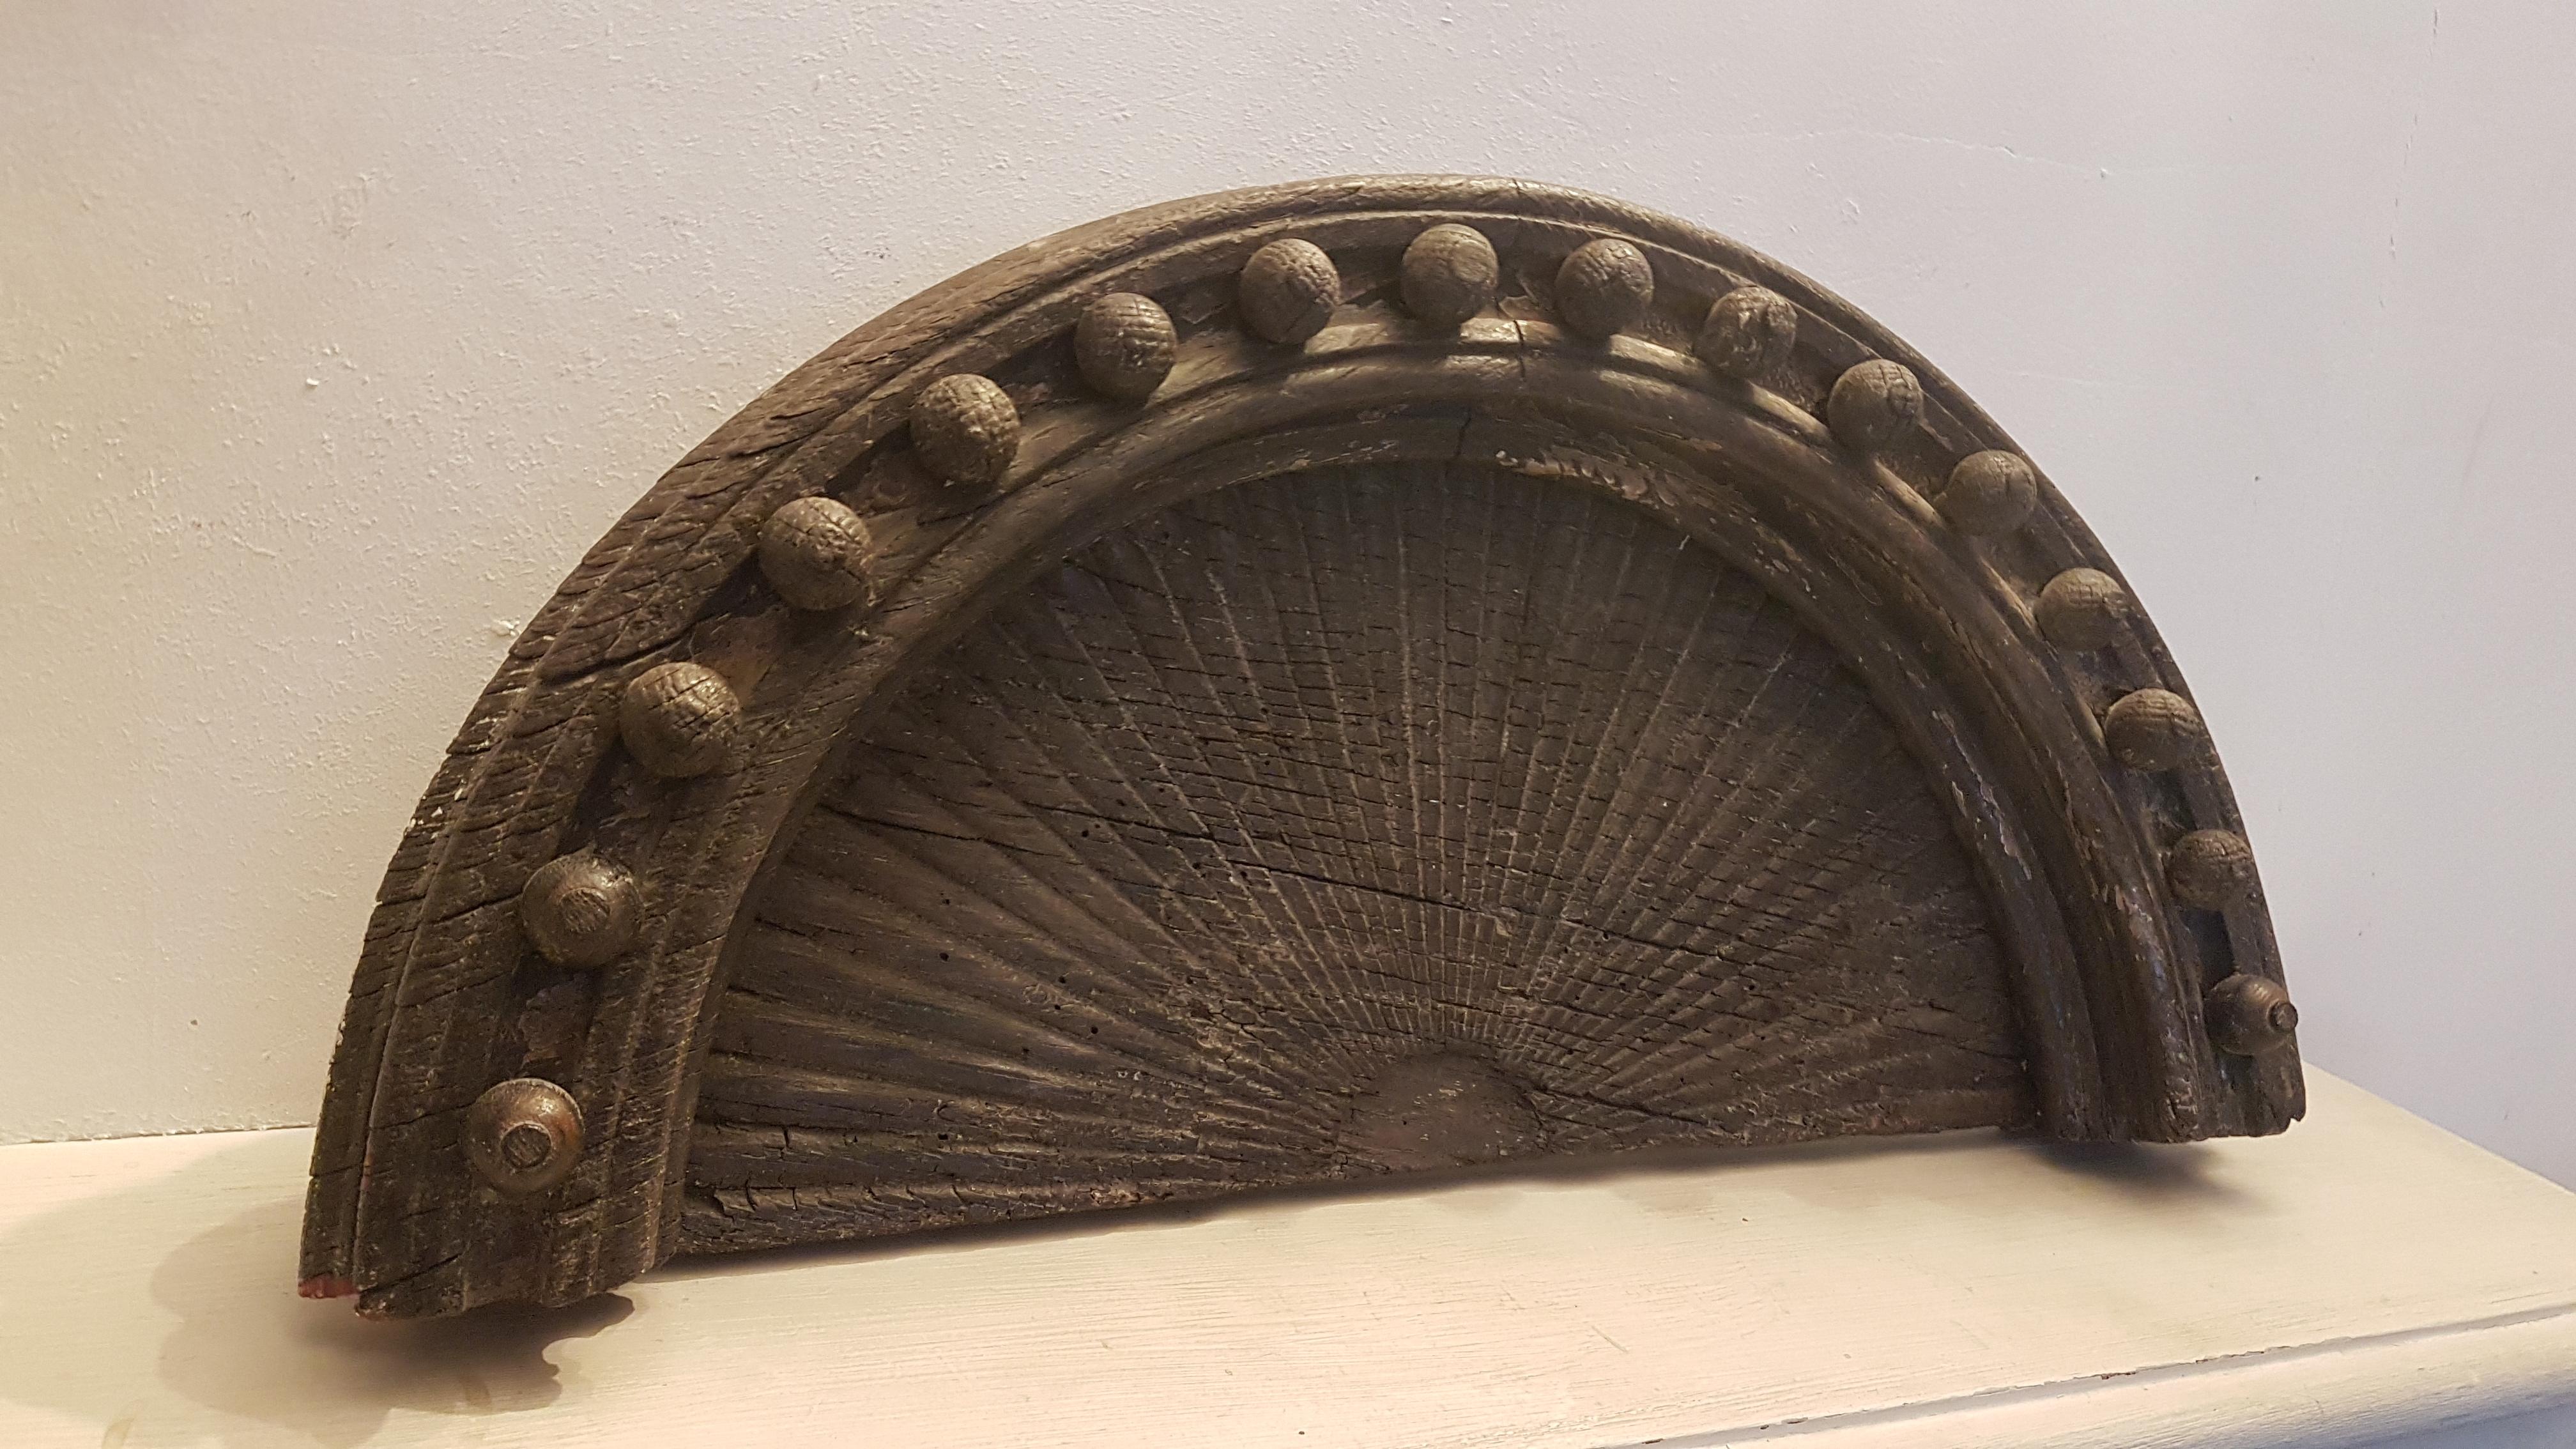 This is a beautiful rustic architectural crest element most likely from a grand English country house furniture fitment. It is carved in oak and has traces of old paint around it that have survived what appears to be decades of weathering. The